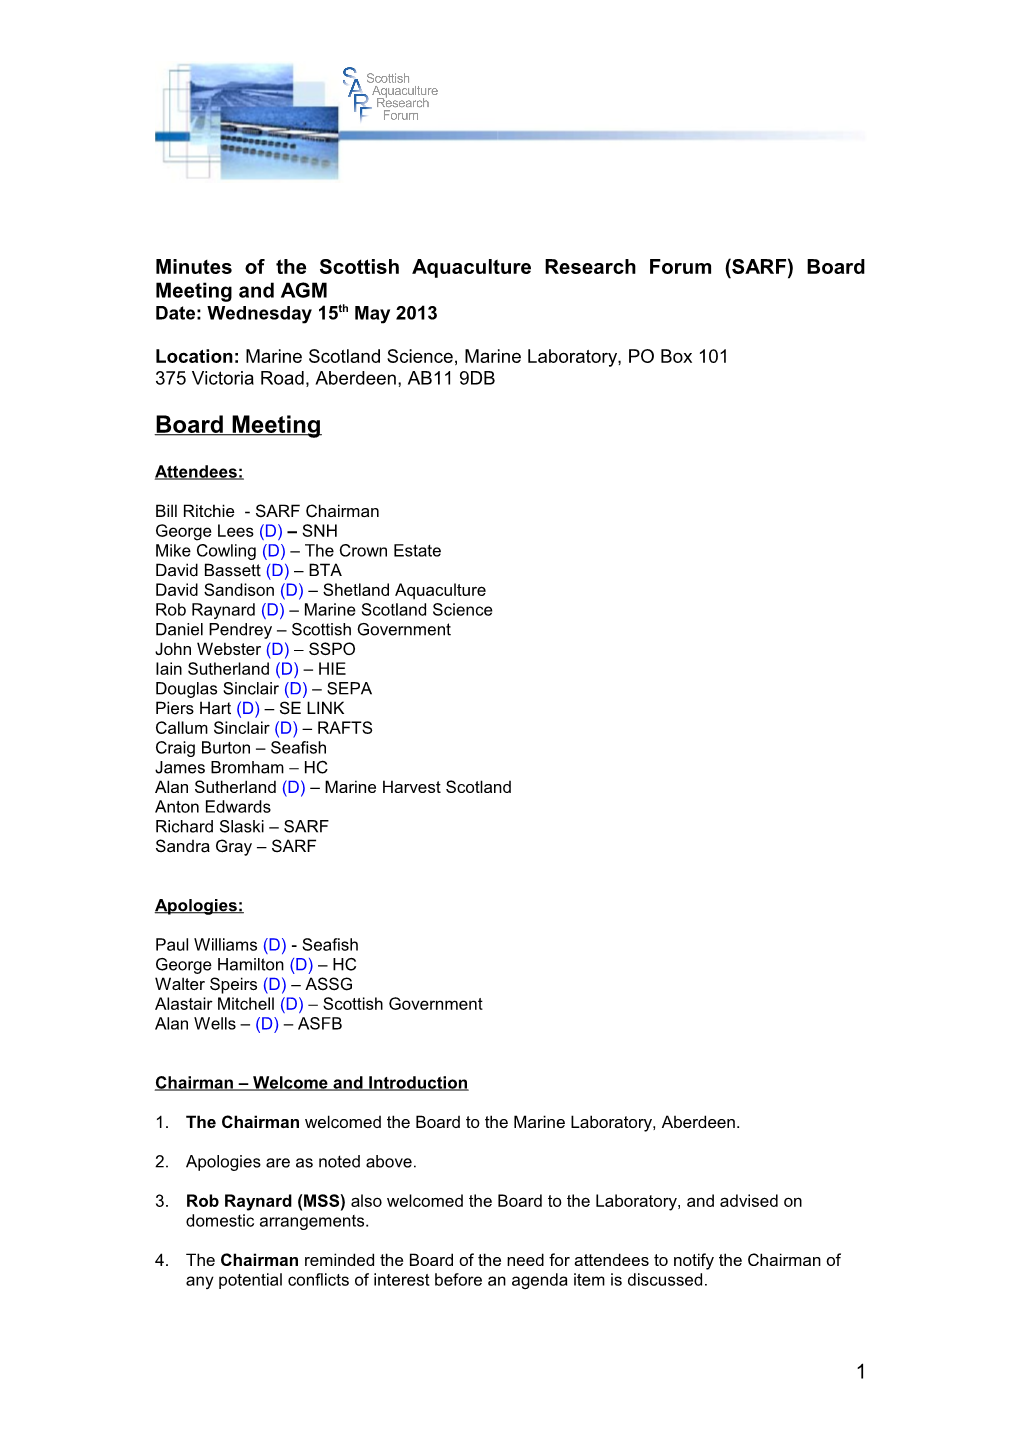 Minutes of the Scottish Aquaculture Research Forum (SARF) Board Meeting and AGM